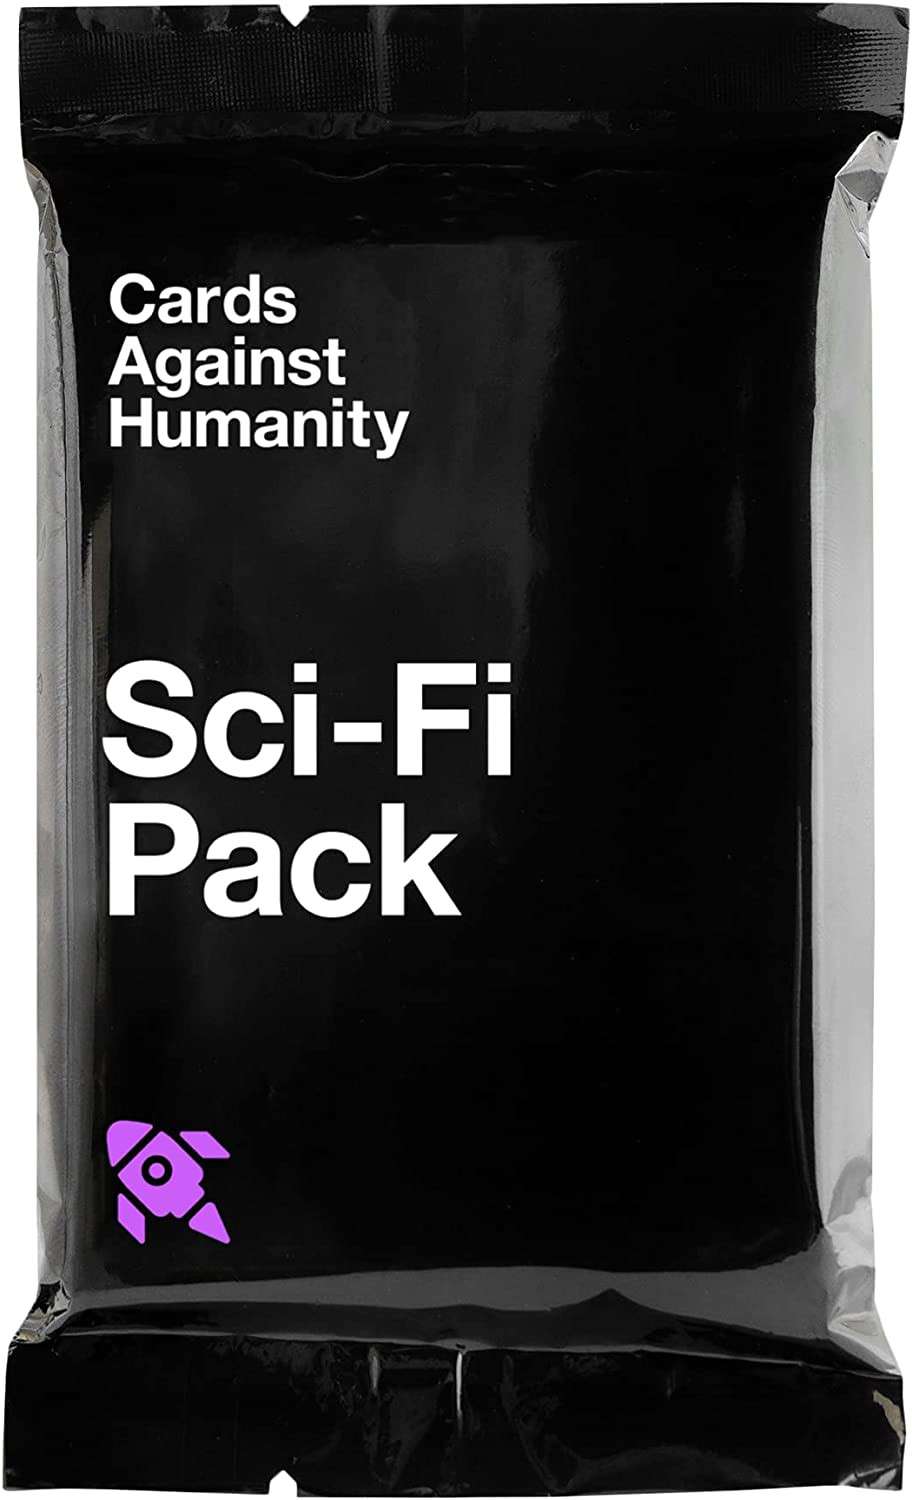 CARDS AGAINST HUMANITY SCI FI PACK